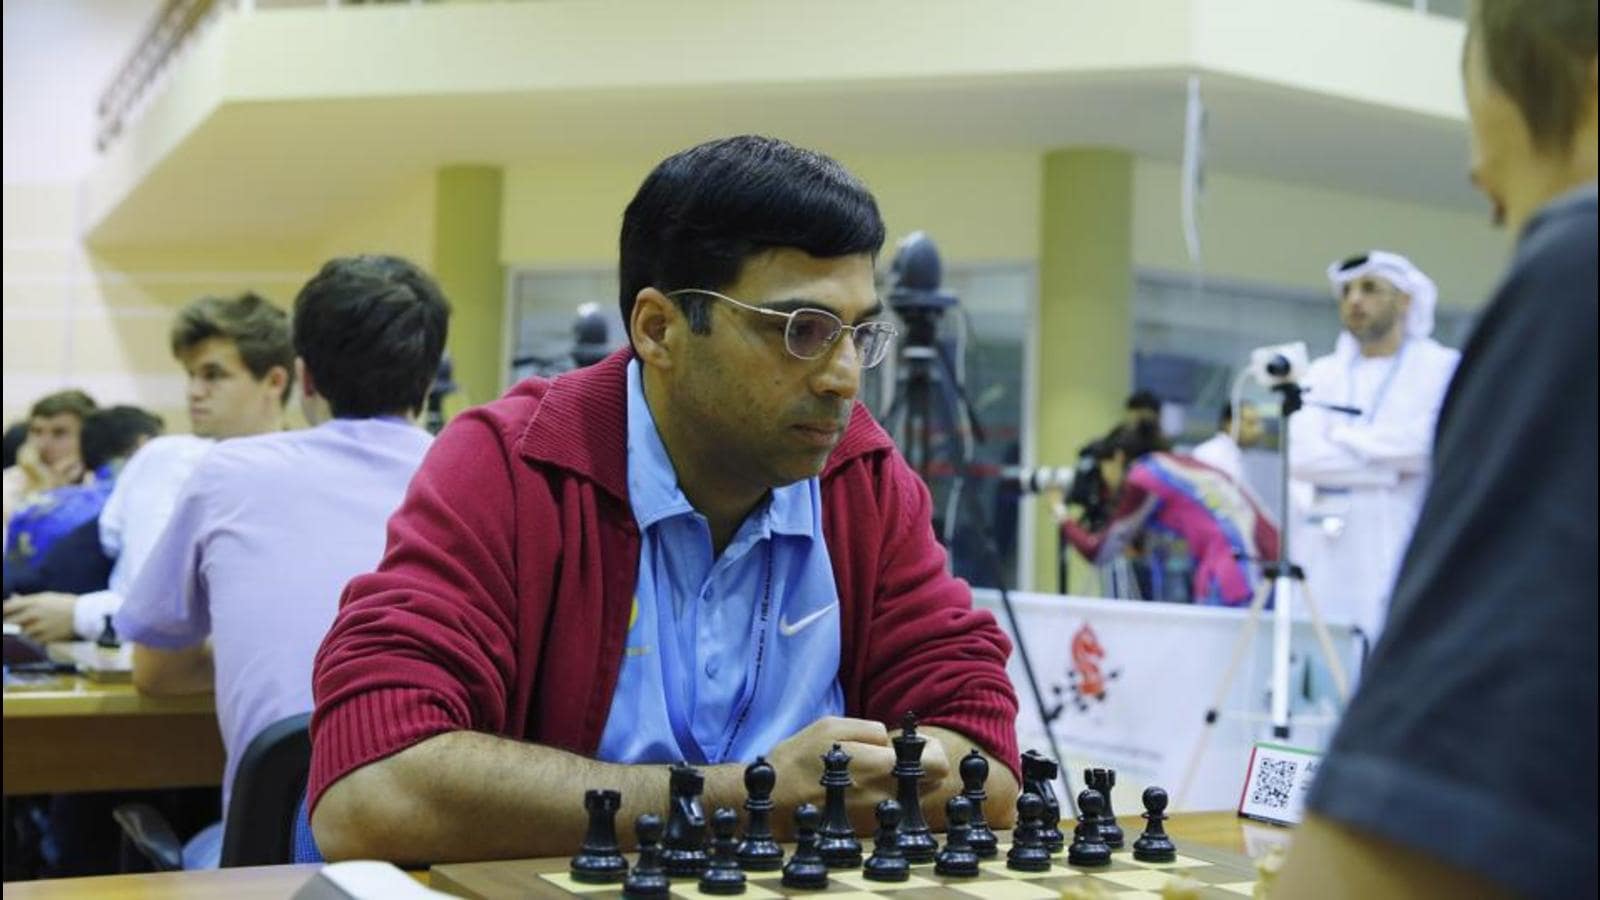 Beating Vishy Anand after blundering on move one - ChessBase India